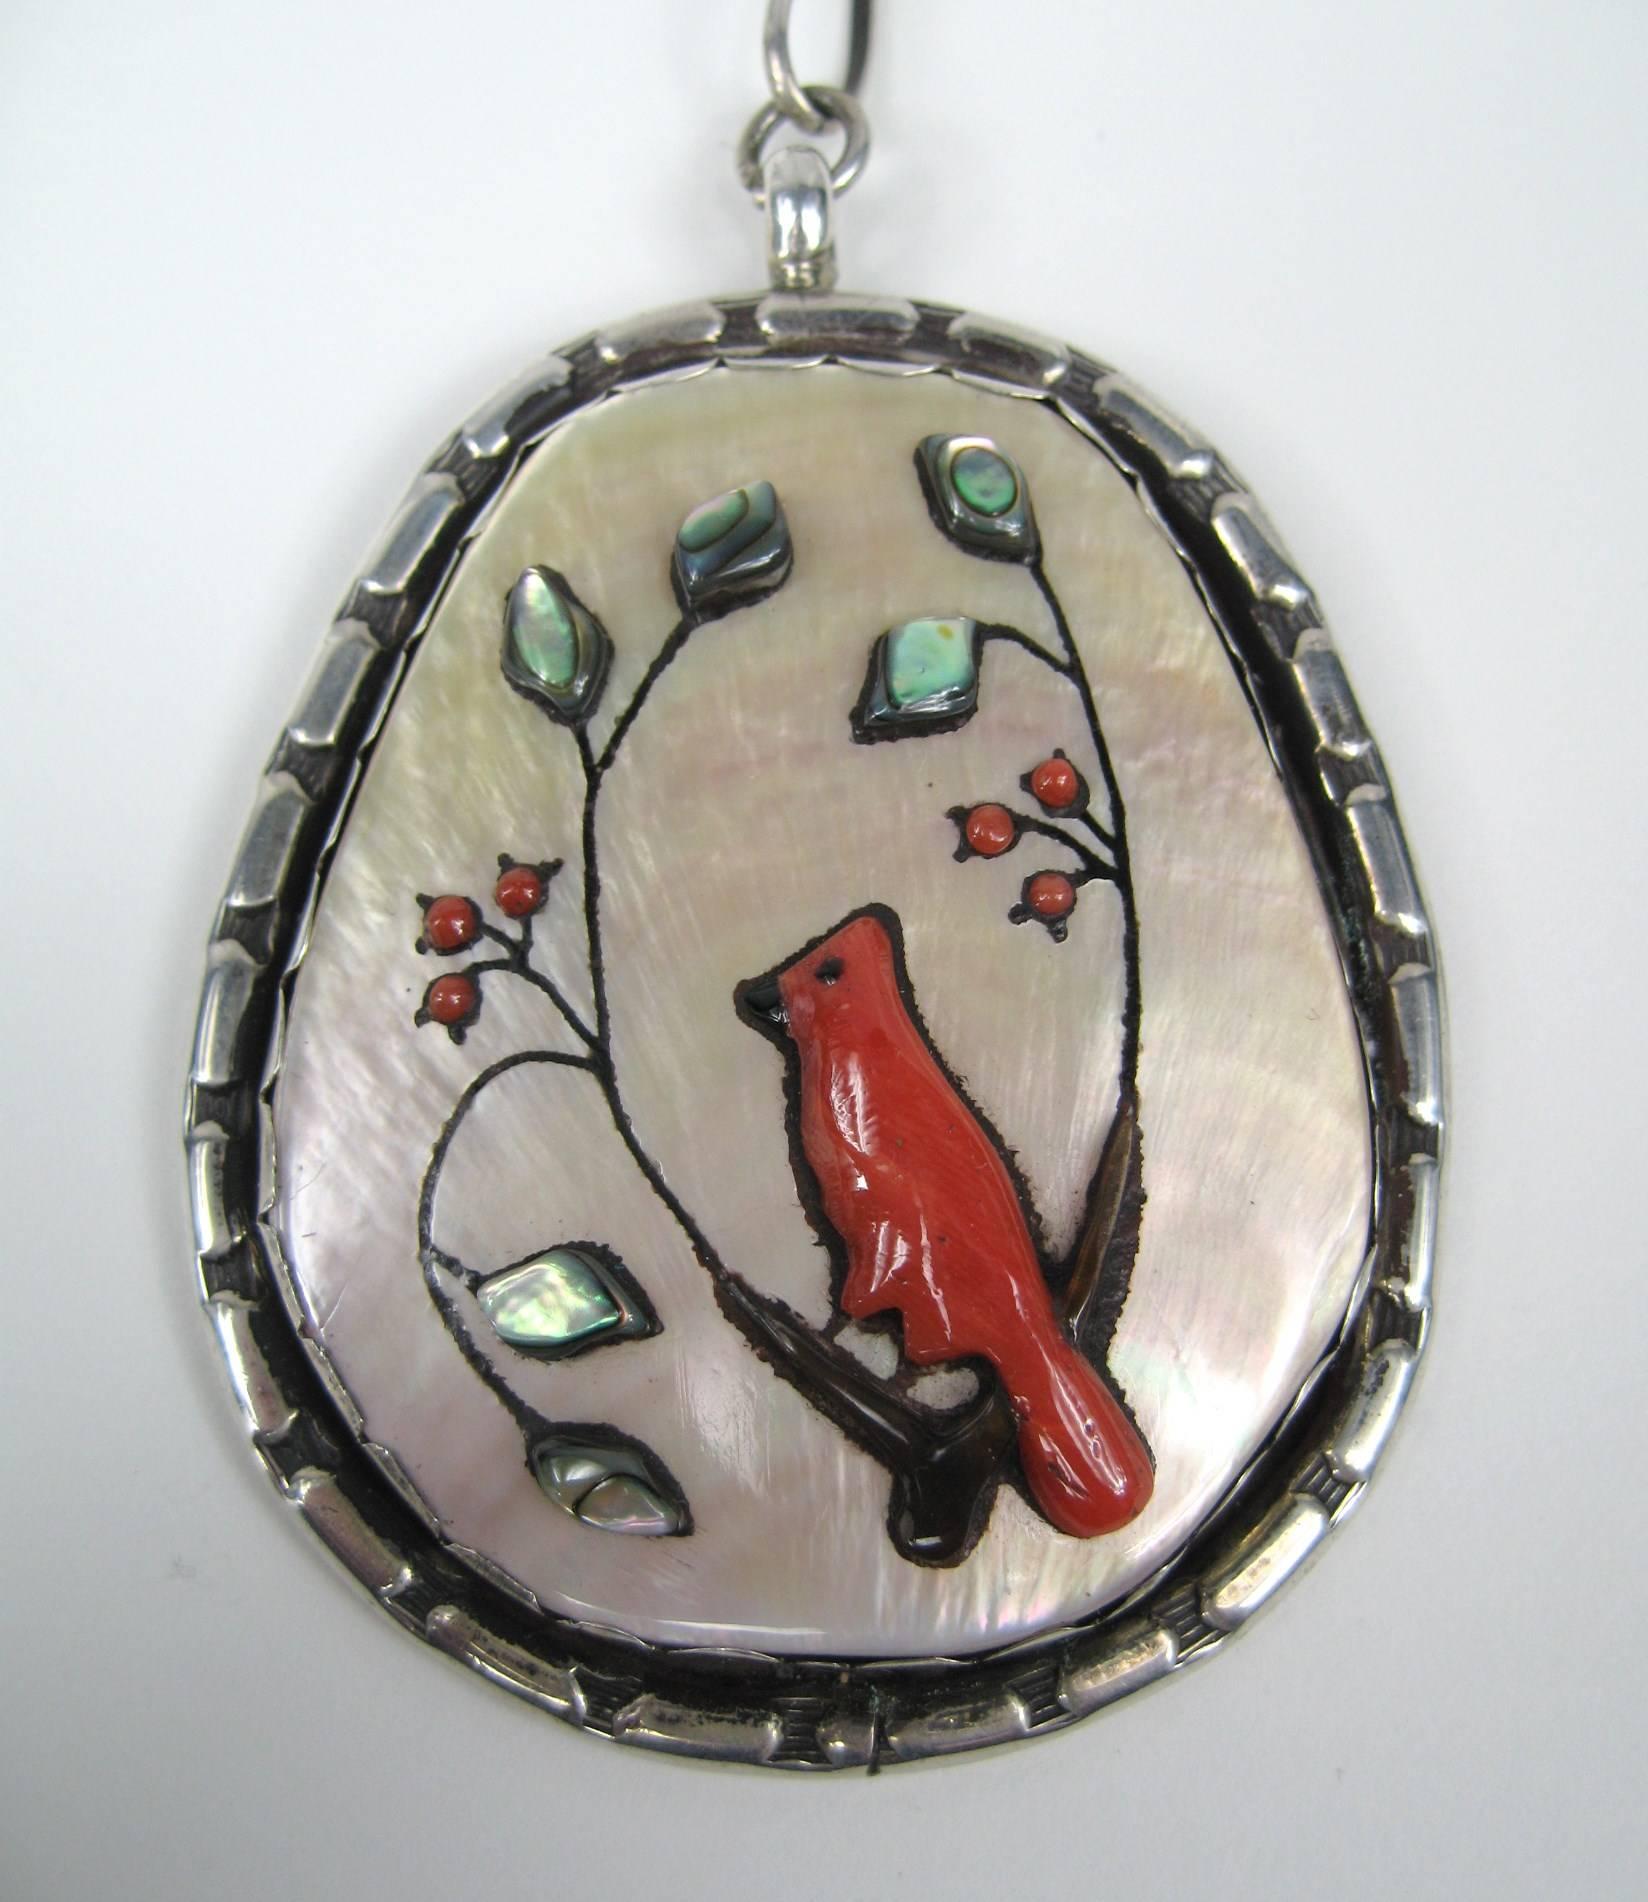 Stunning Pendant depicting a Cardinal Large in scale made up of Shell with inlaid Coral and Abalone. Cardinal sitting on a Tree Branch, Hallmarked on the back side. Large link necklace attached Measures 2.56 in x 2.19 in. The Links are .57 in x .23